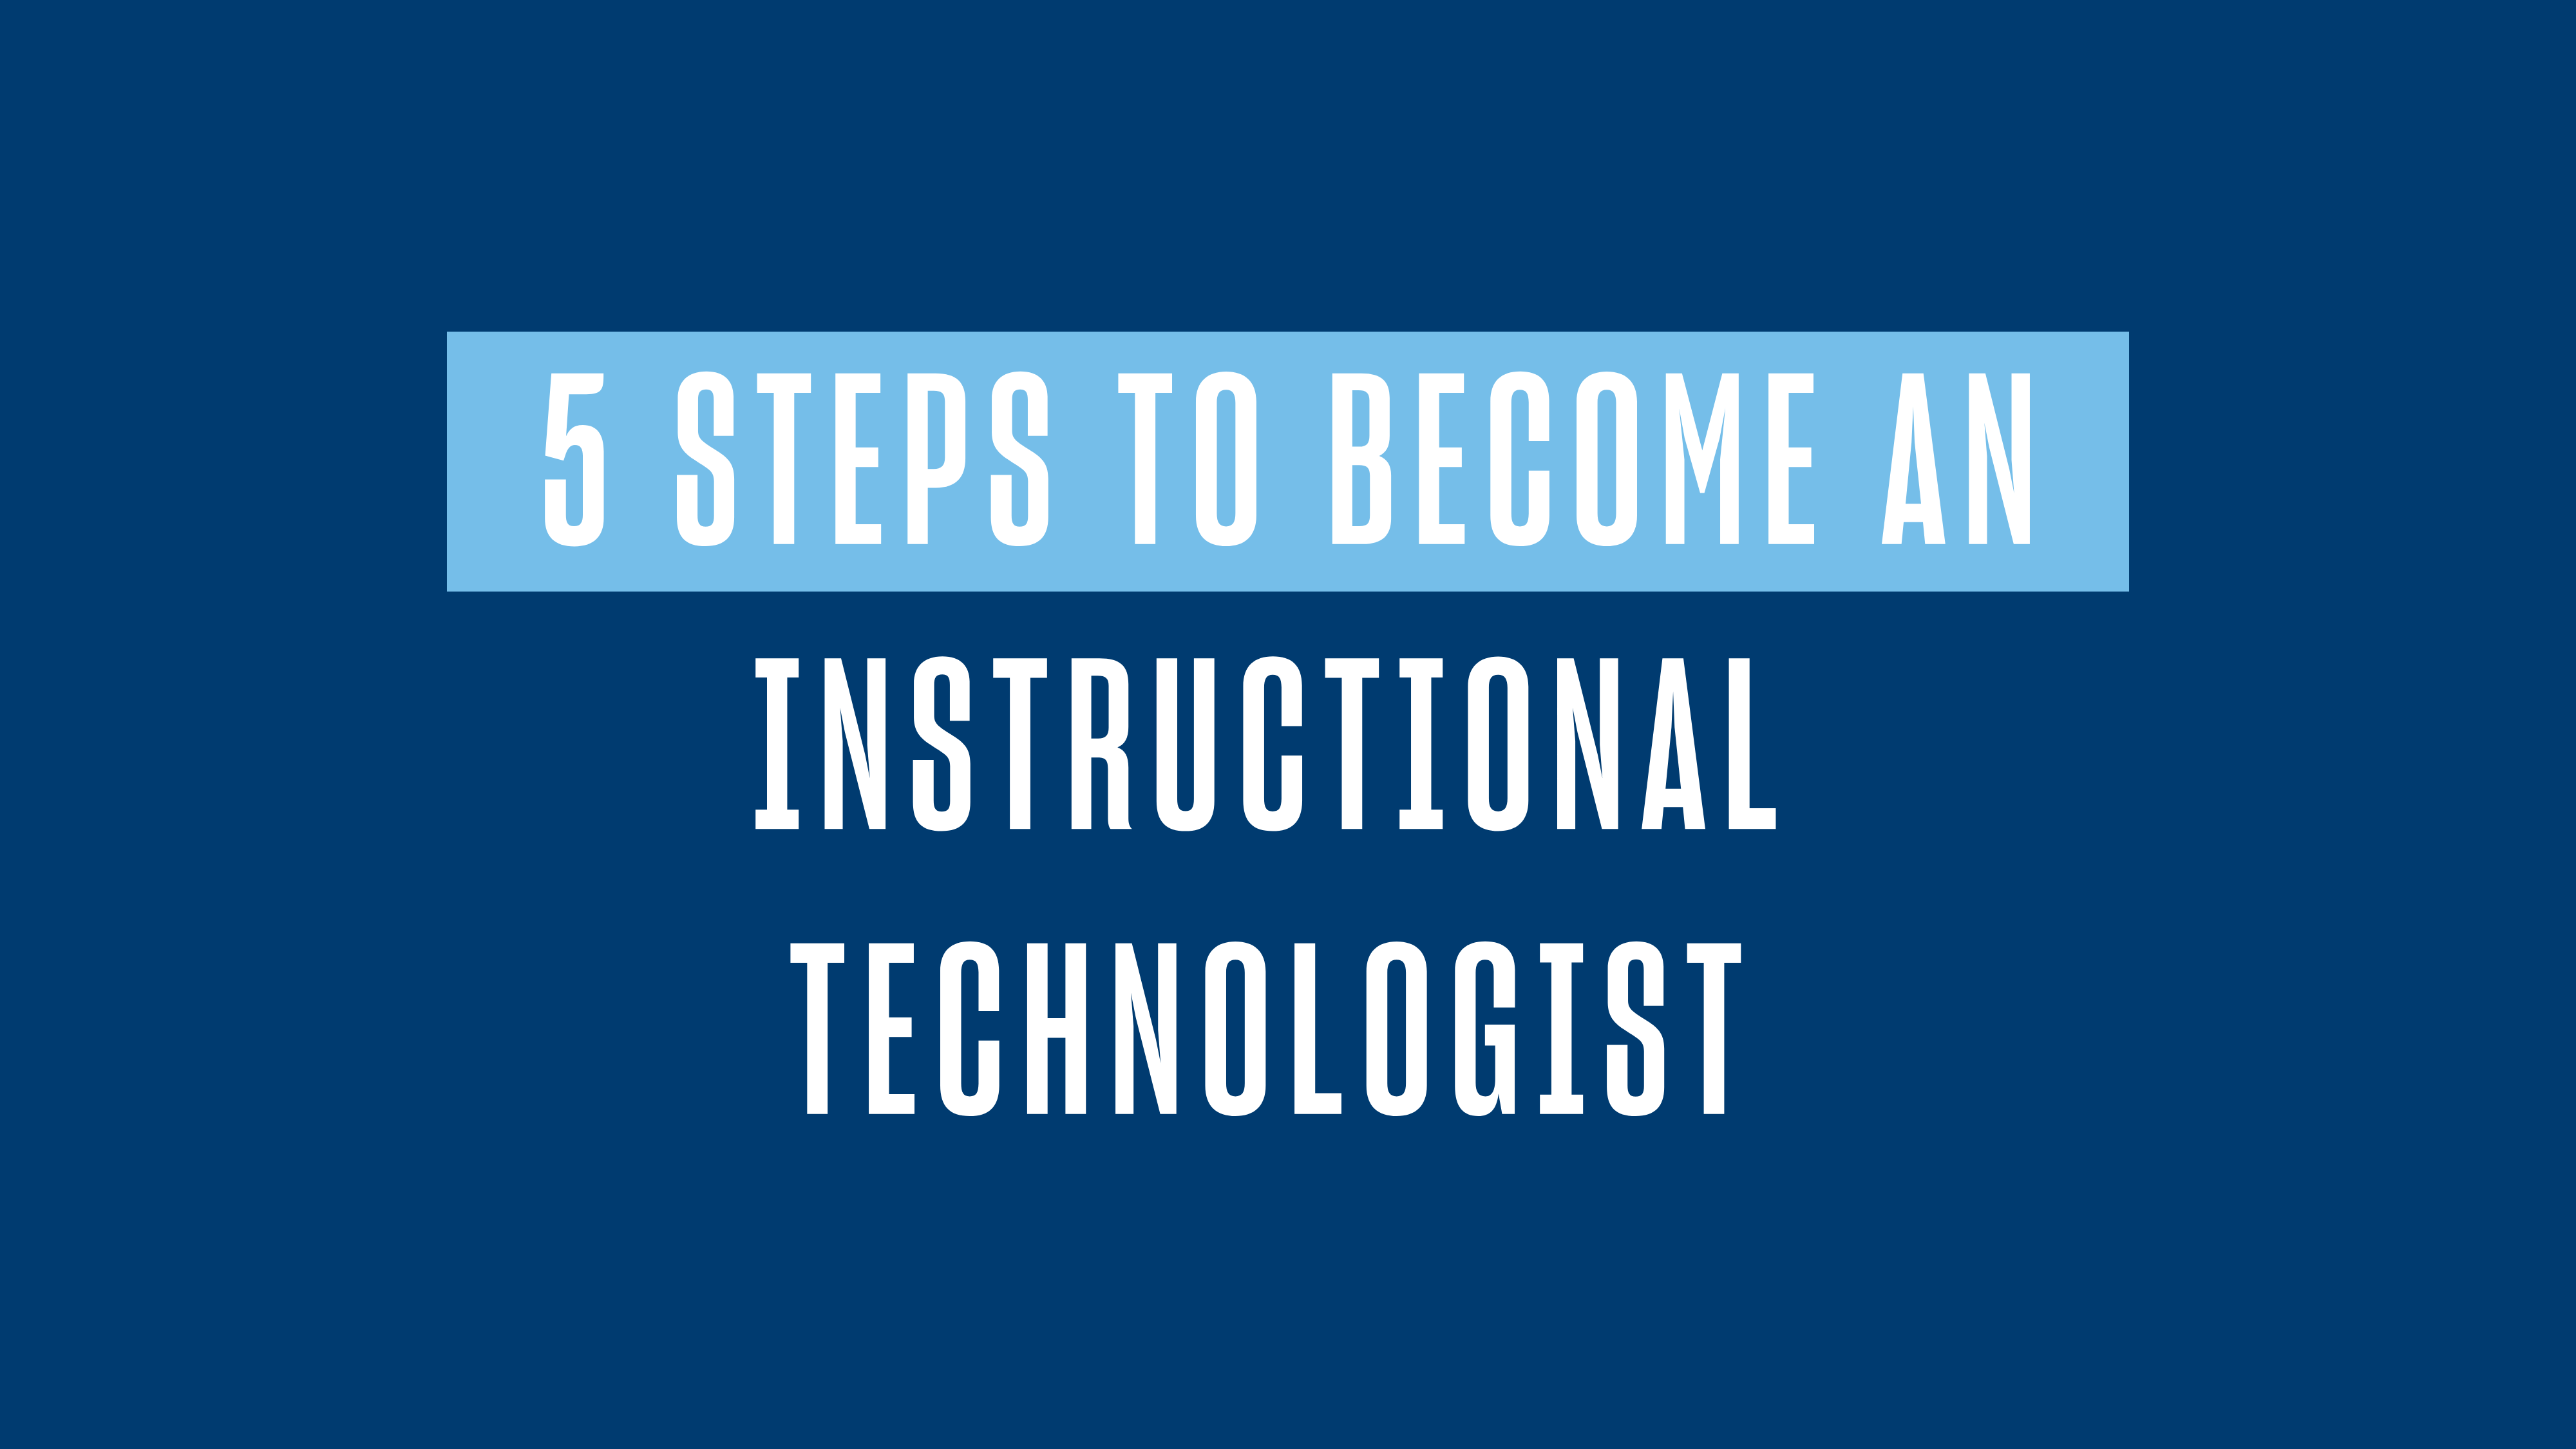 5 Steps To Become an Instructional Technologist